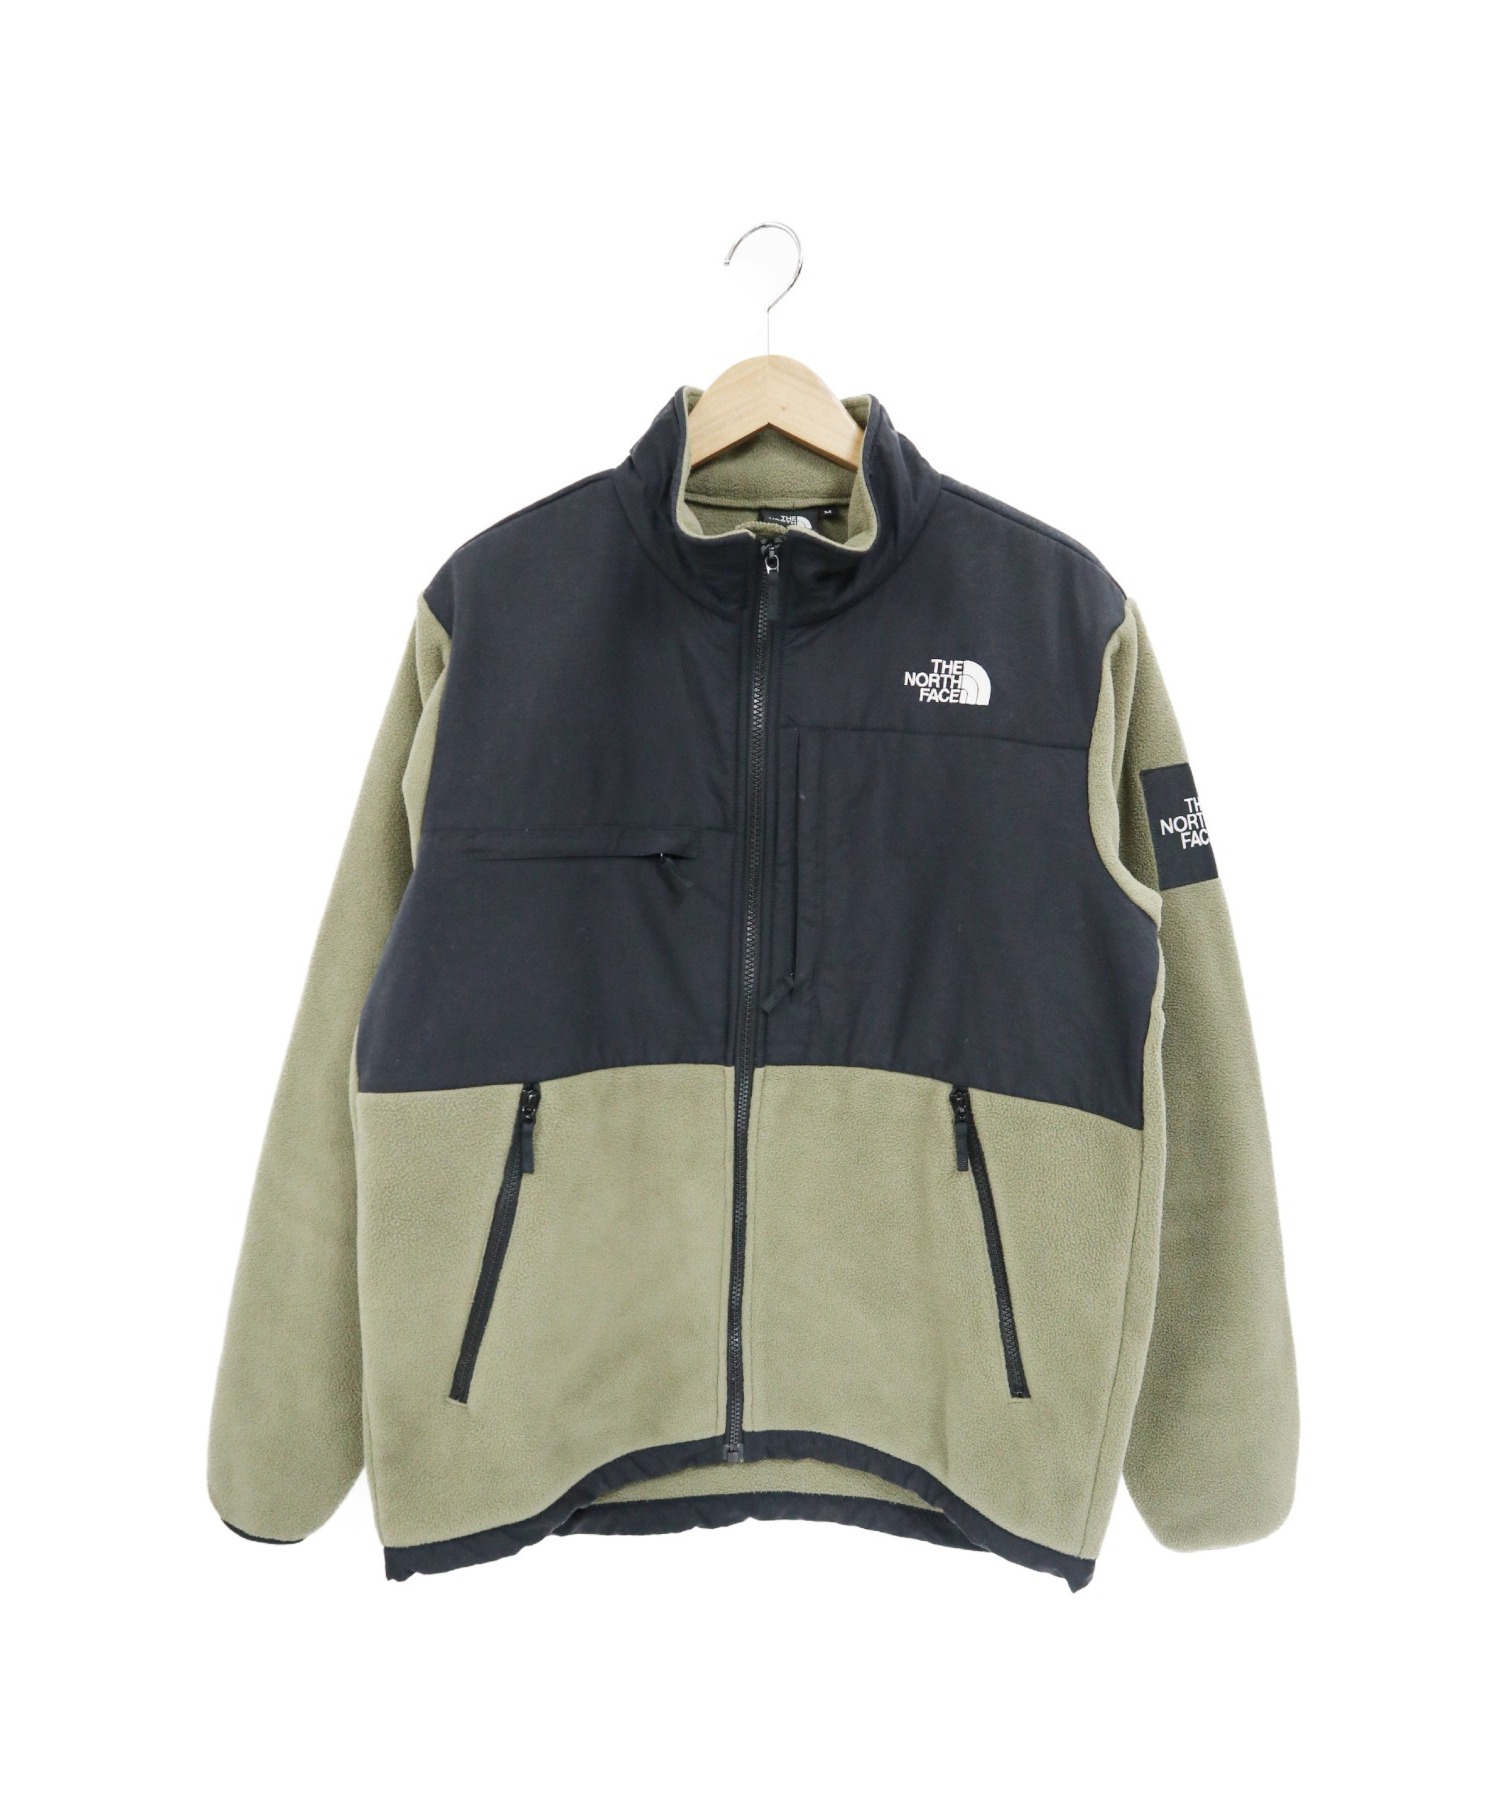 THE NORTH FACE デナリジャケット Mサイズ NA61631 | www.innoveering.net